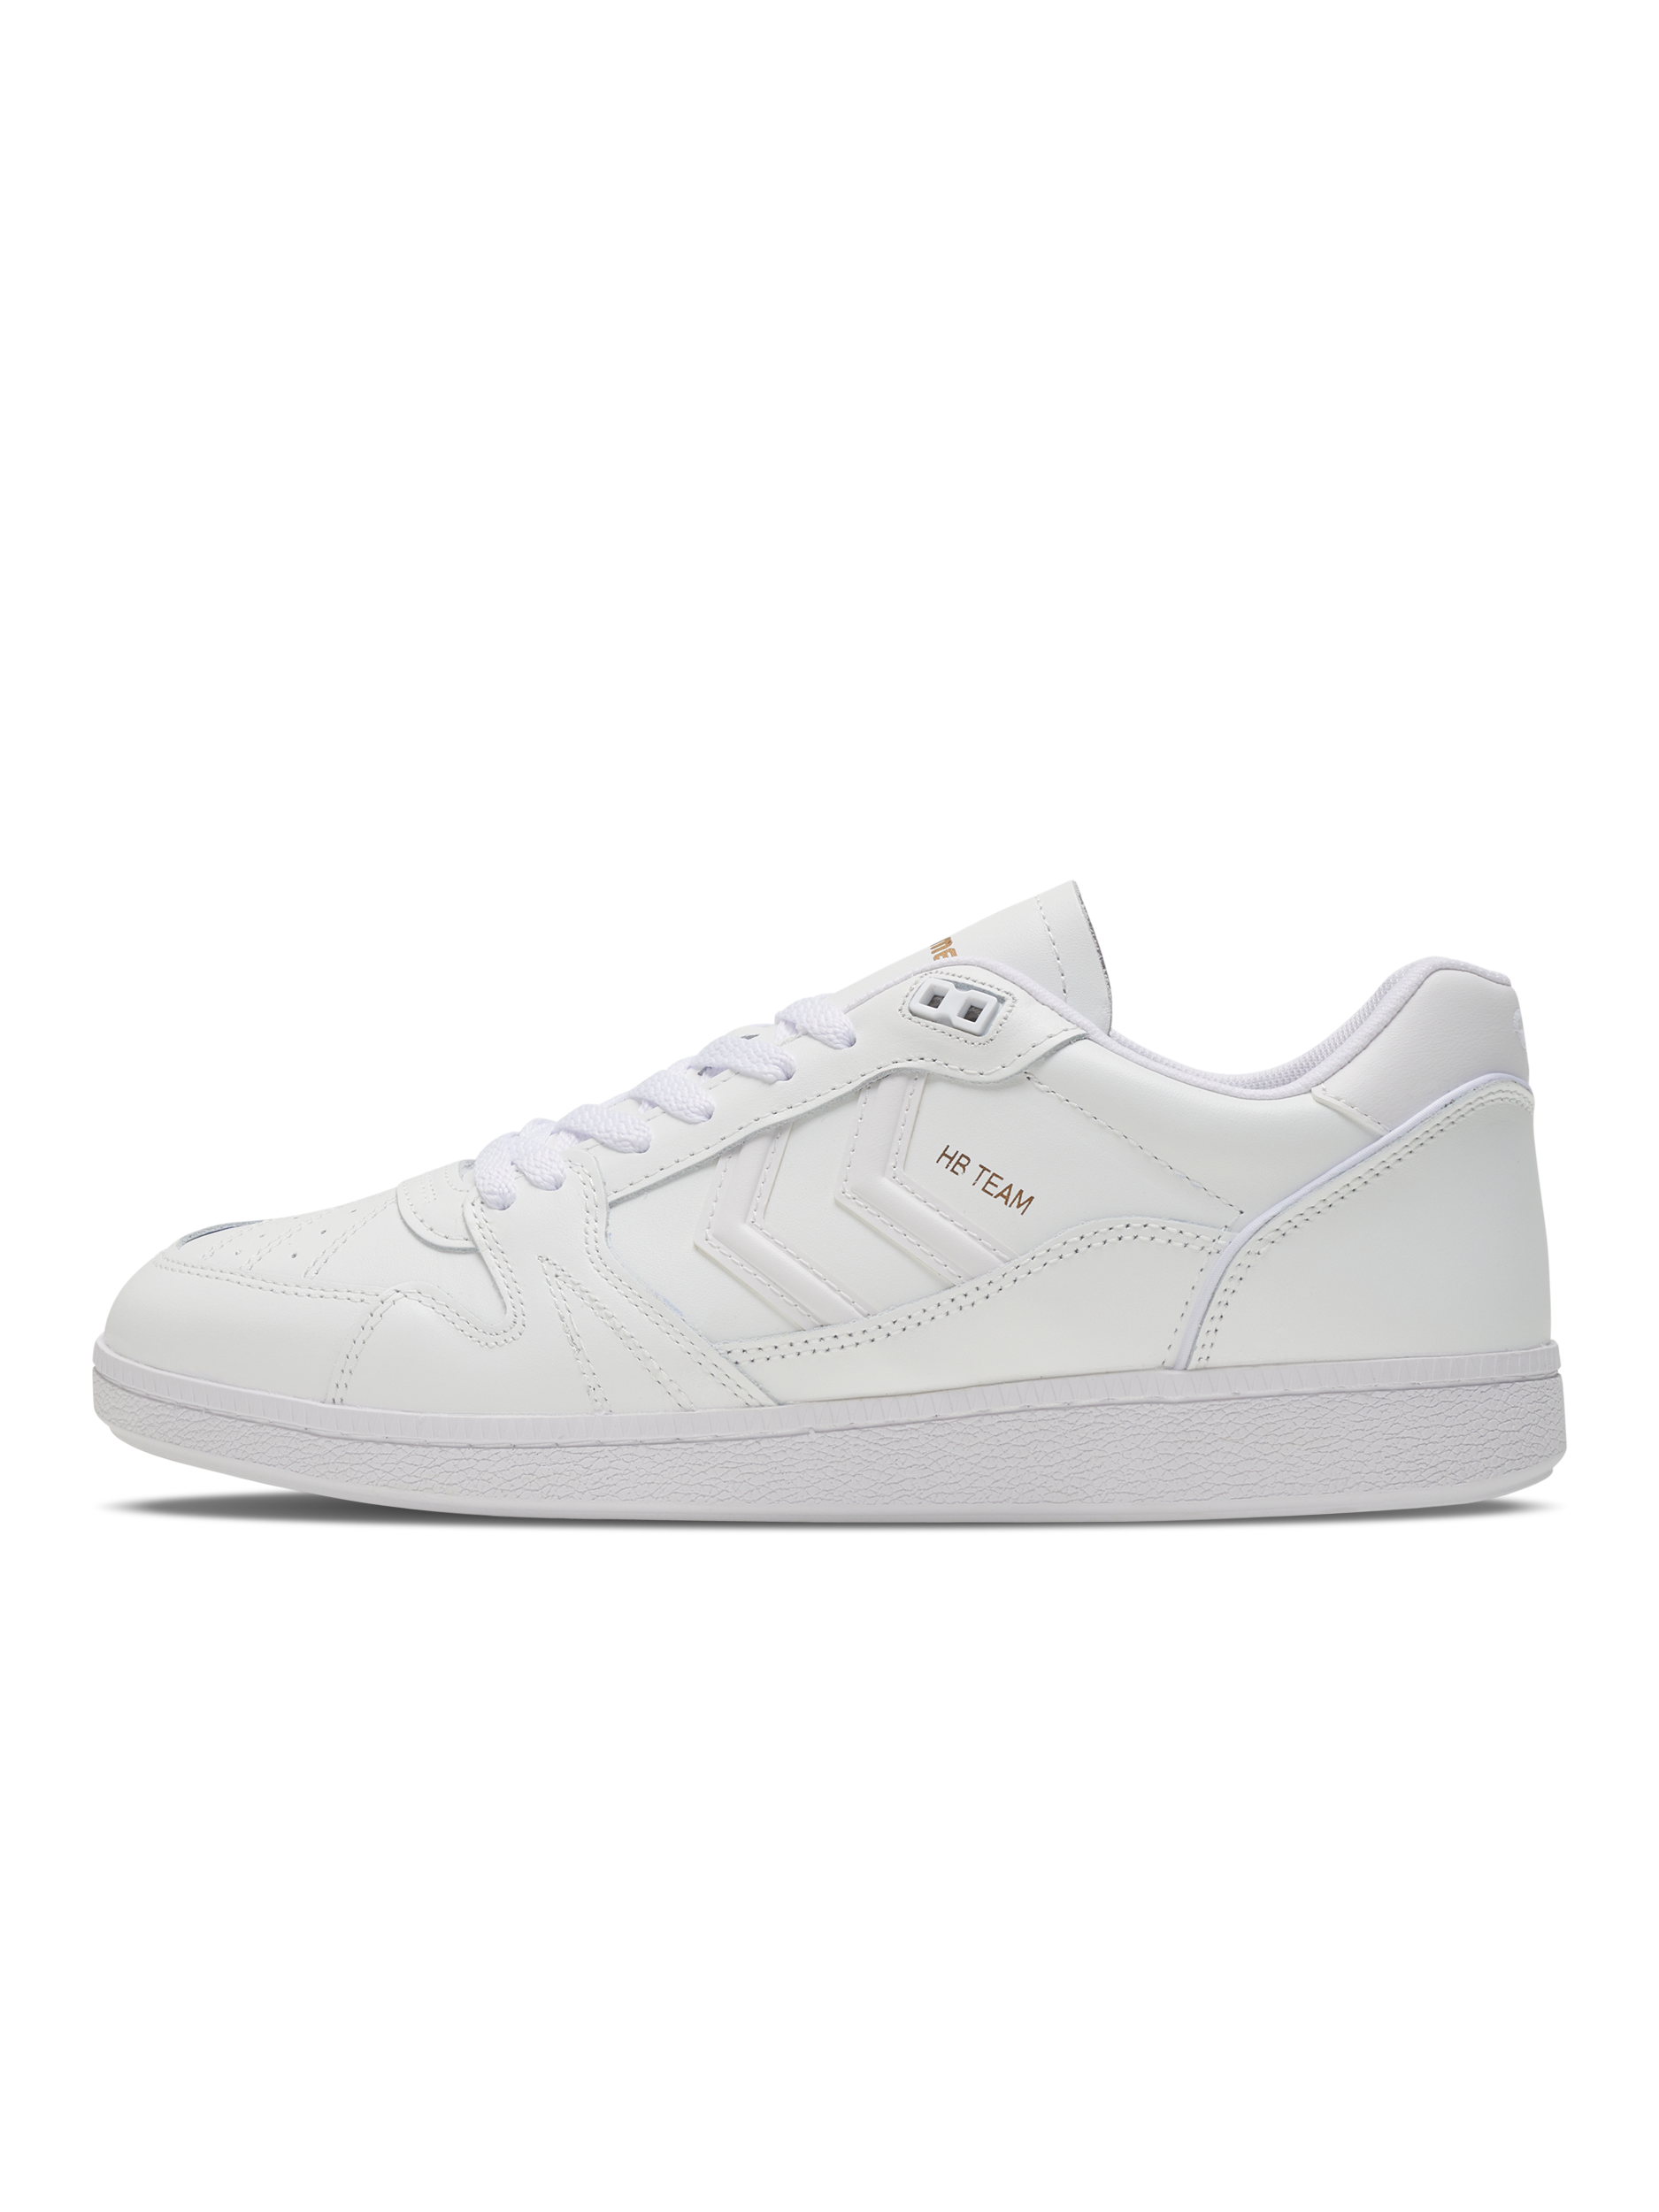 white leather slip on tennis shoes